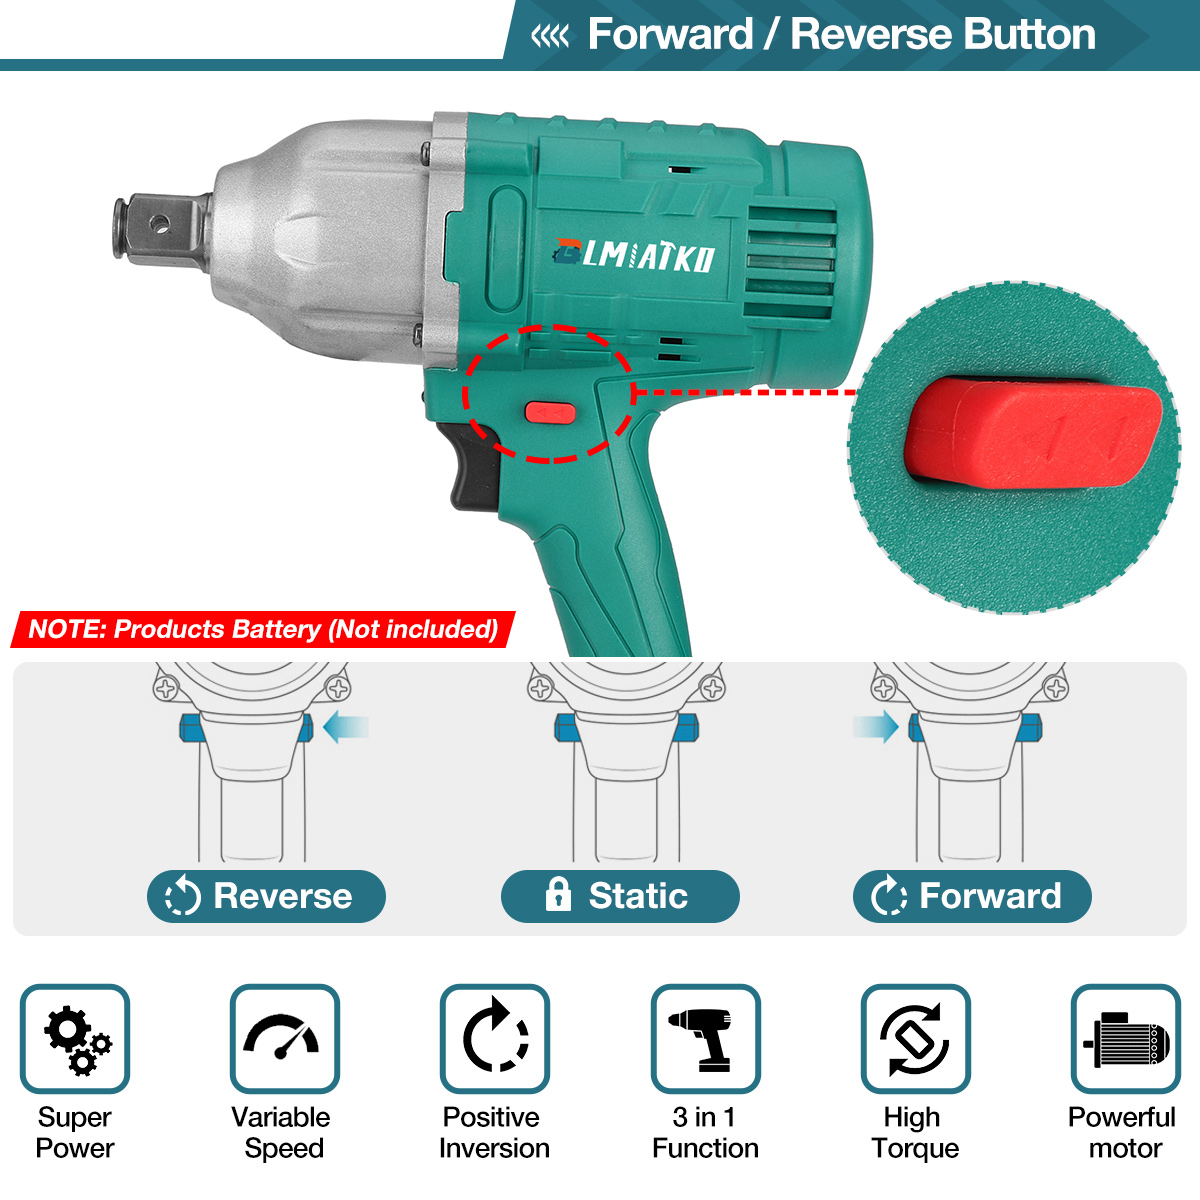 BLMIATKO-18V-1900Nm-Electric-Brushless-Impact-Wrench-Rechargeable-Woodworking-Maintenance-Tool-1943538-10